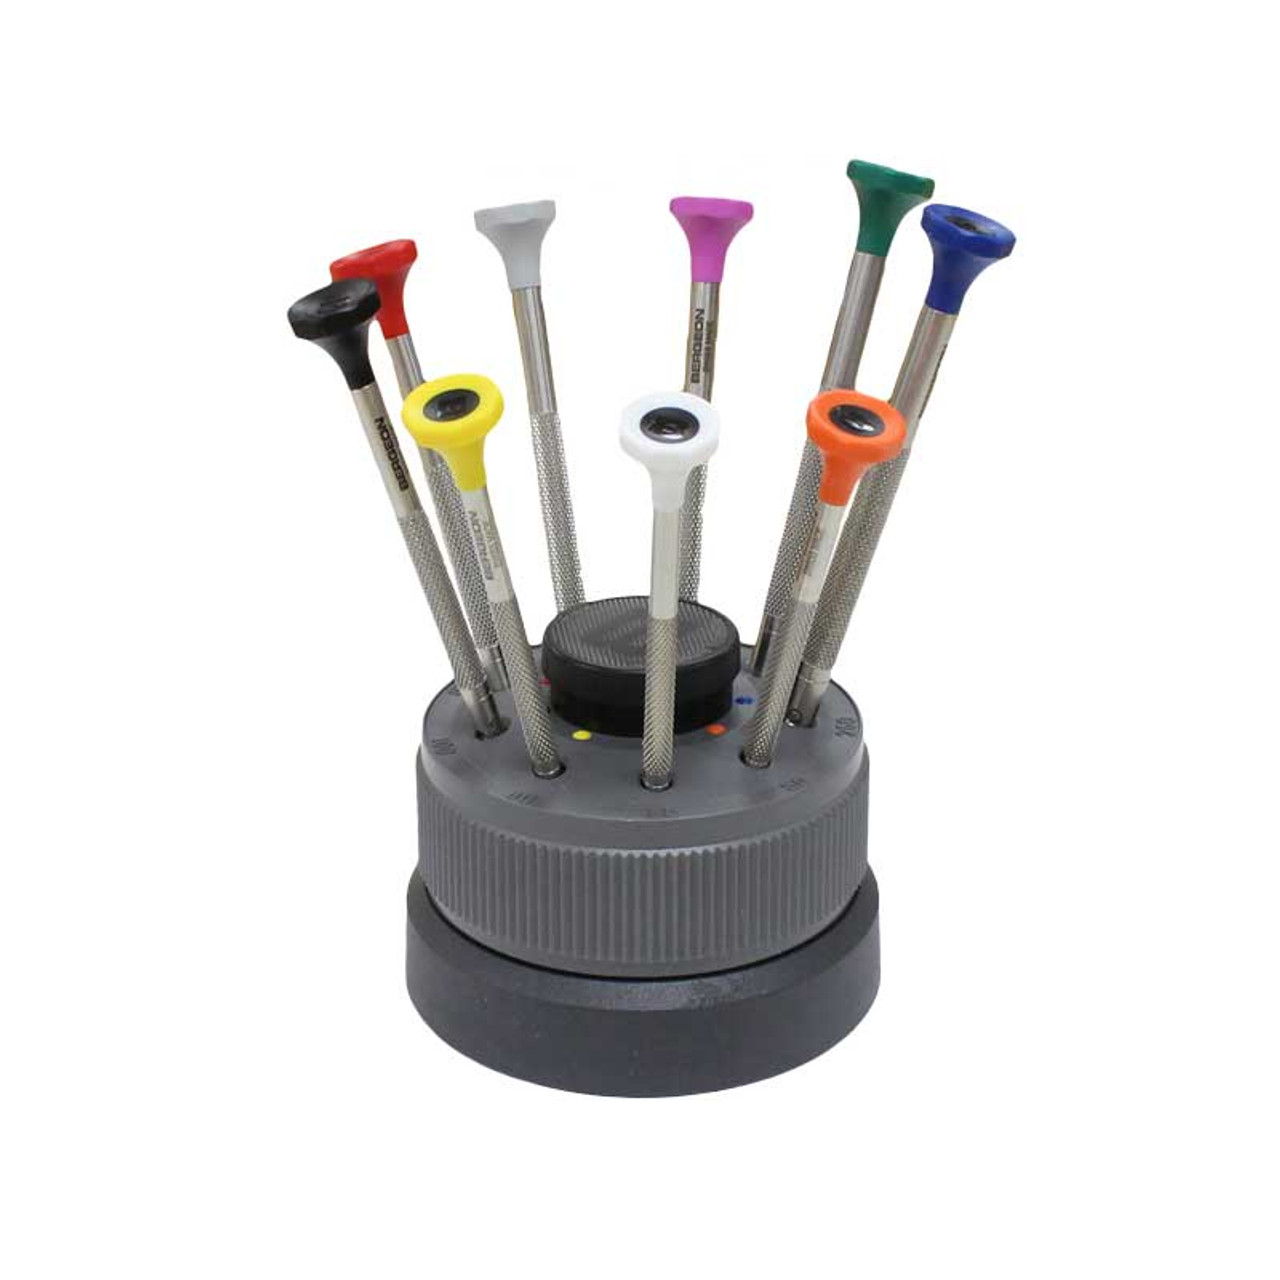 Bergeon 30081/S09 Screwdriver Set, 9 Pieces with Rotating Stand, Stainless Steel Screwdriver for Watch Making